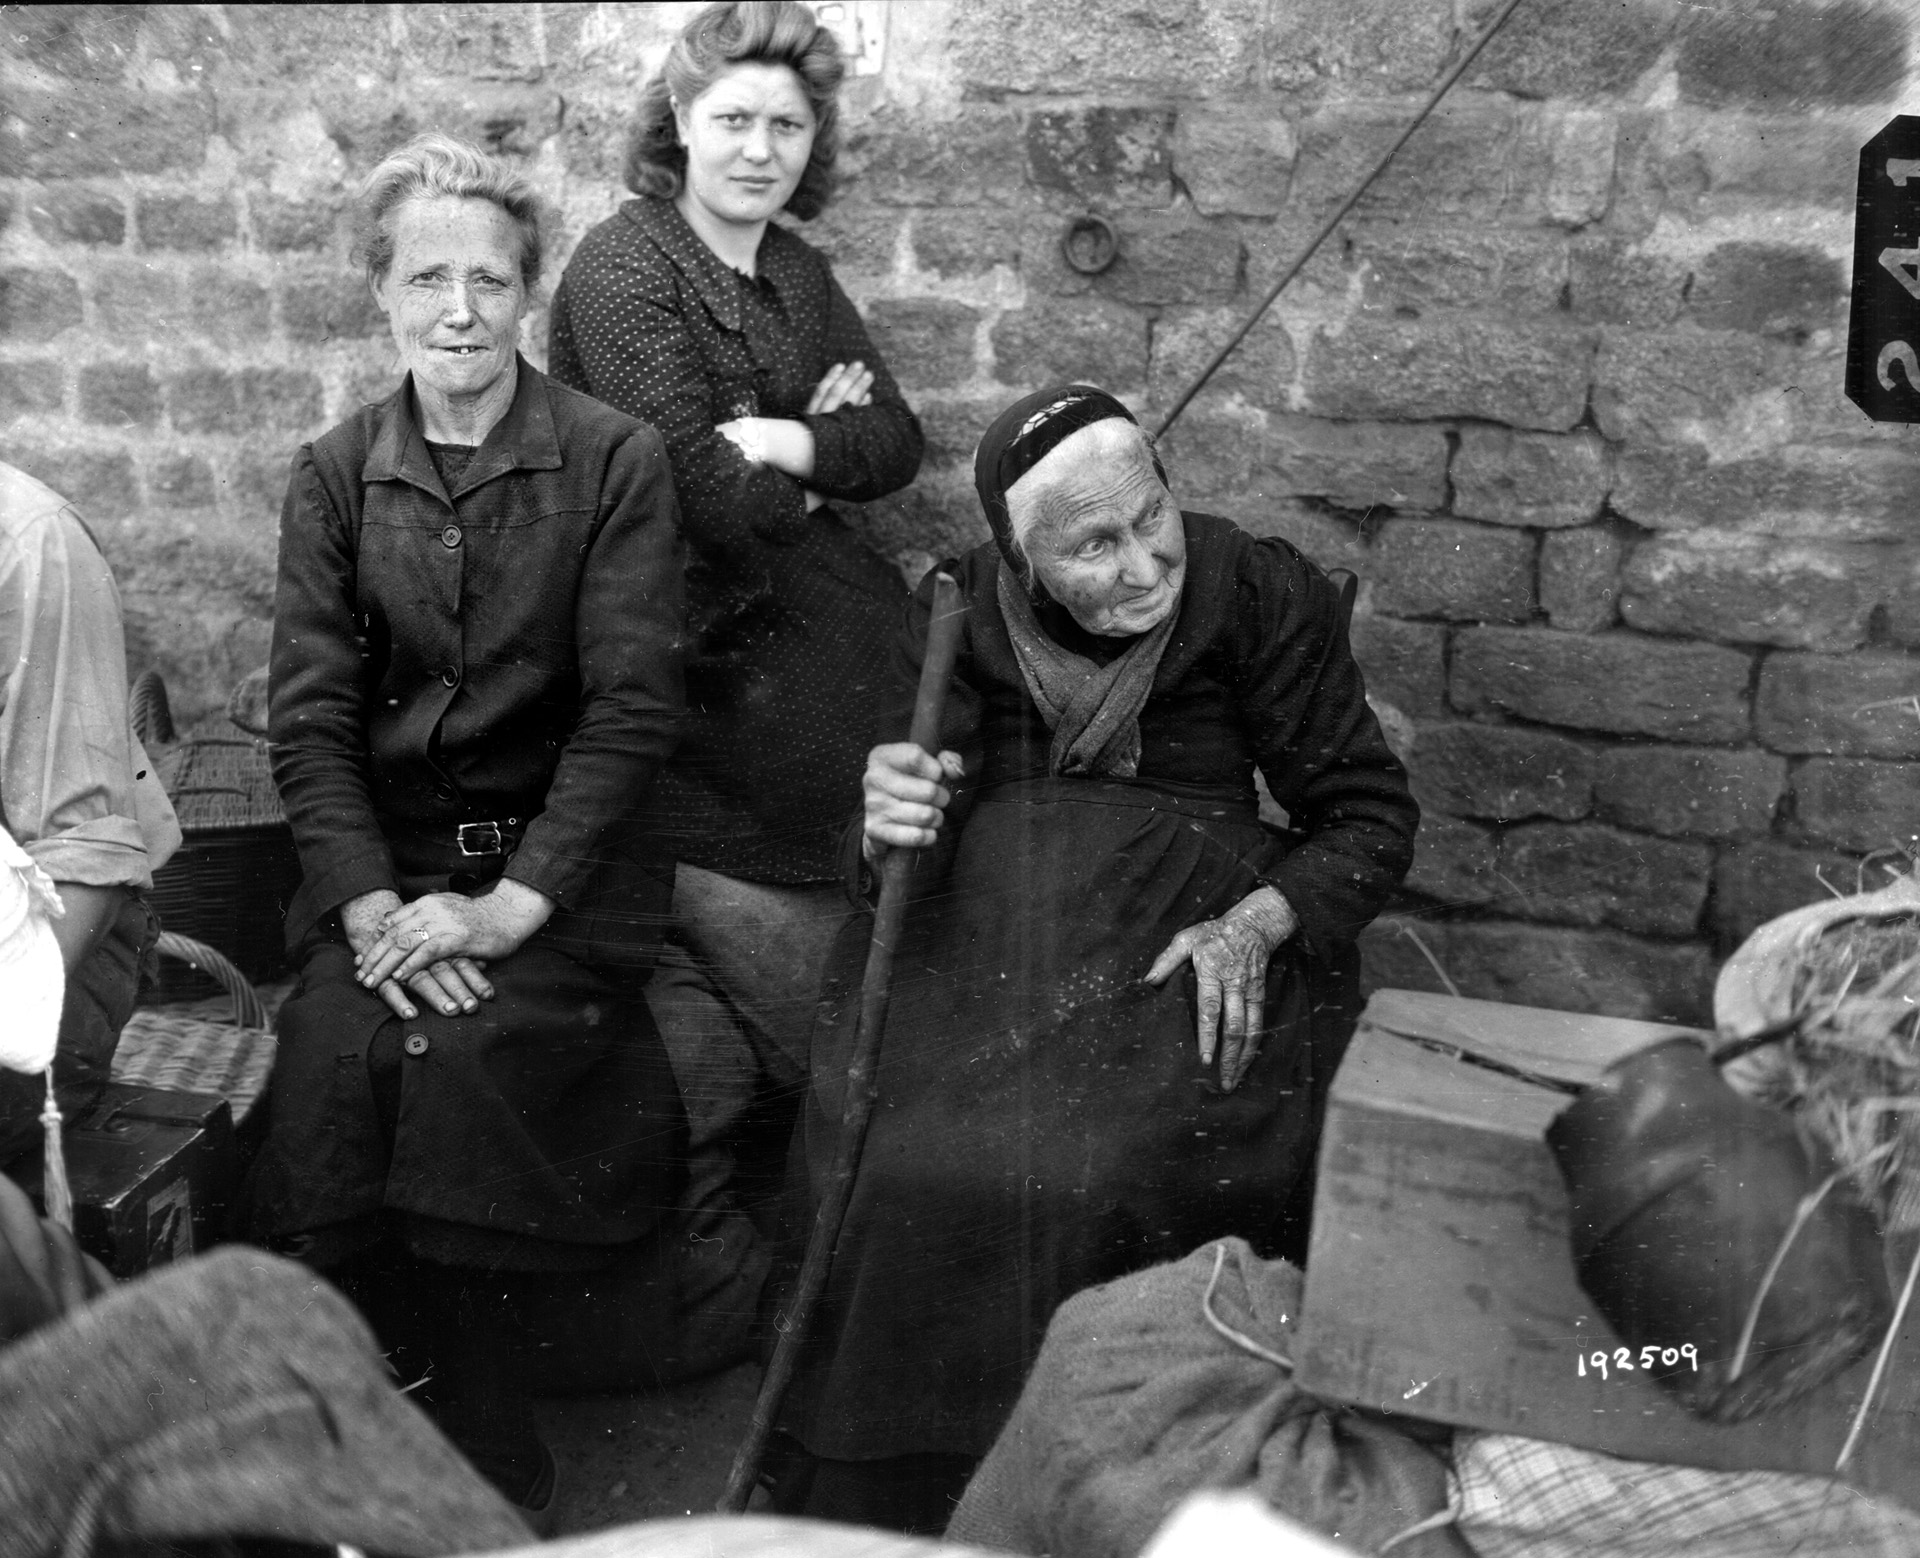 Civilians always seem to be caught in the middle during a war. Here, three women are photographed after they returned home to Mortain once the battle had ended. Townsfolk provided food, water, and other help for the beleagured GIs.